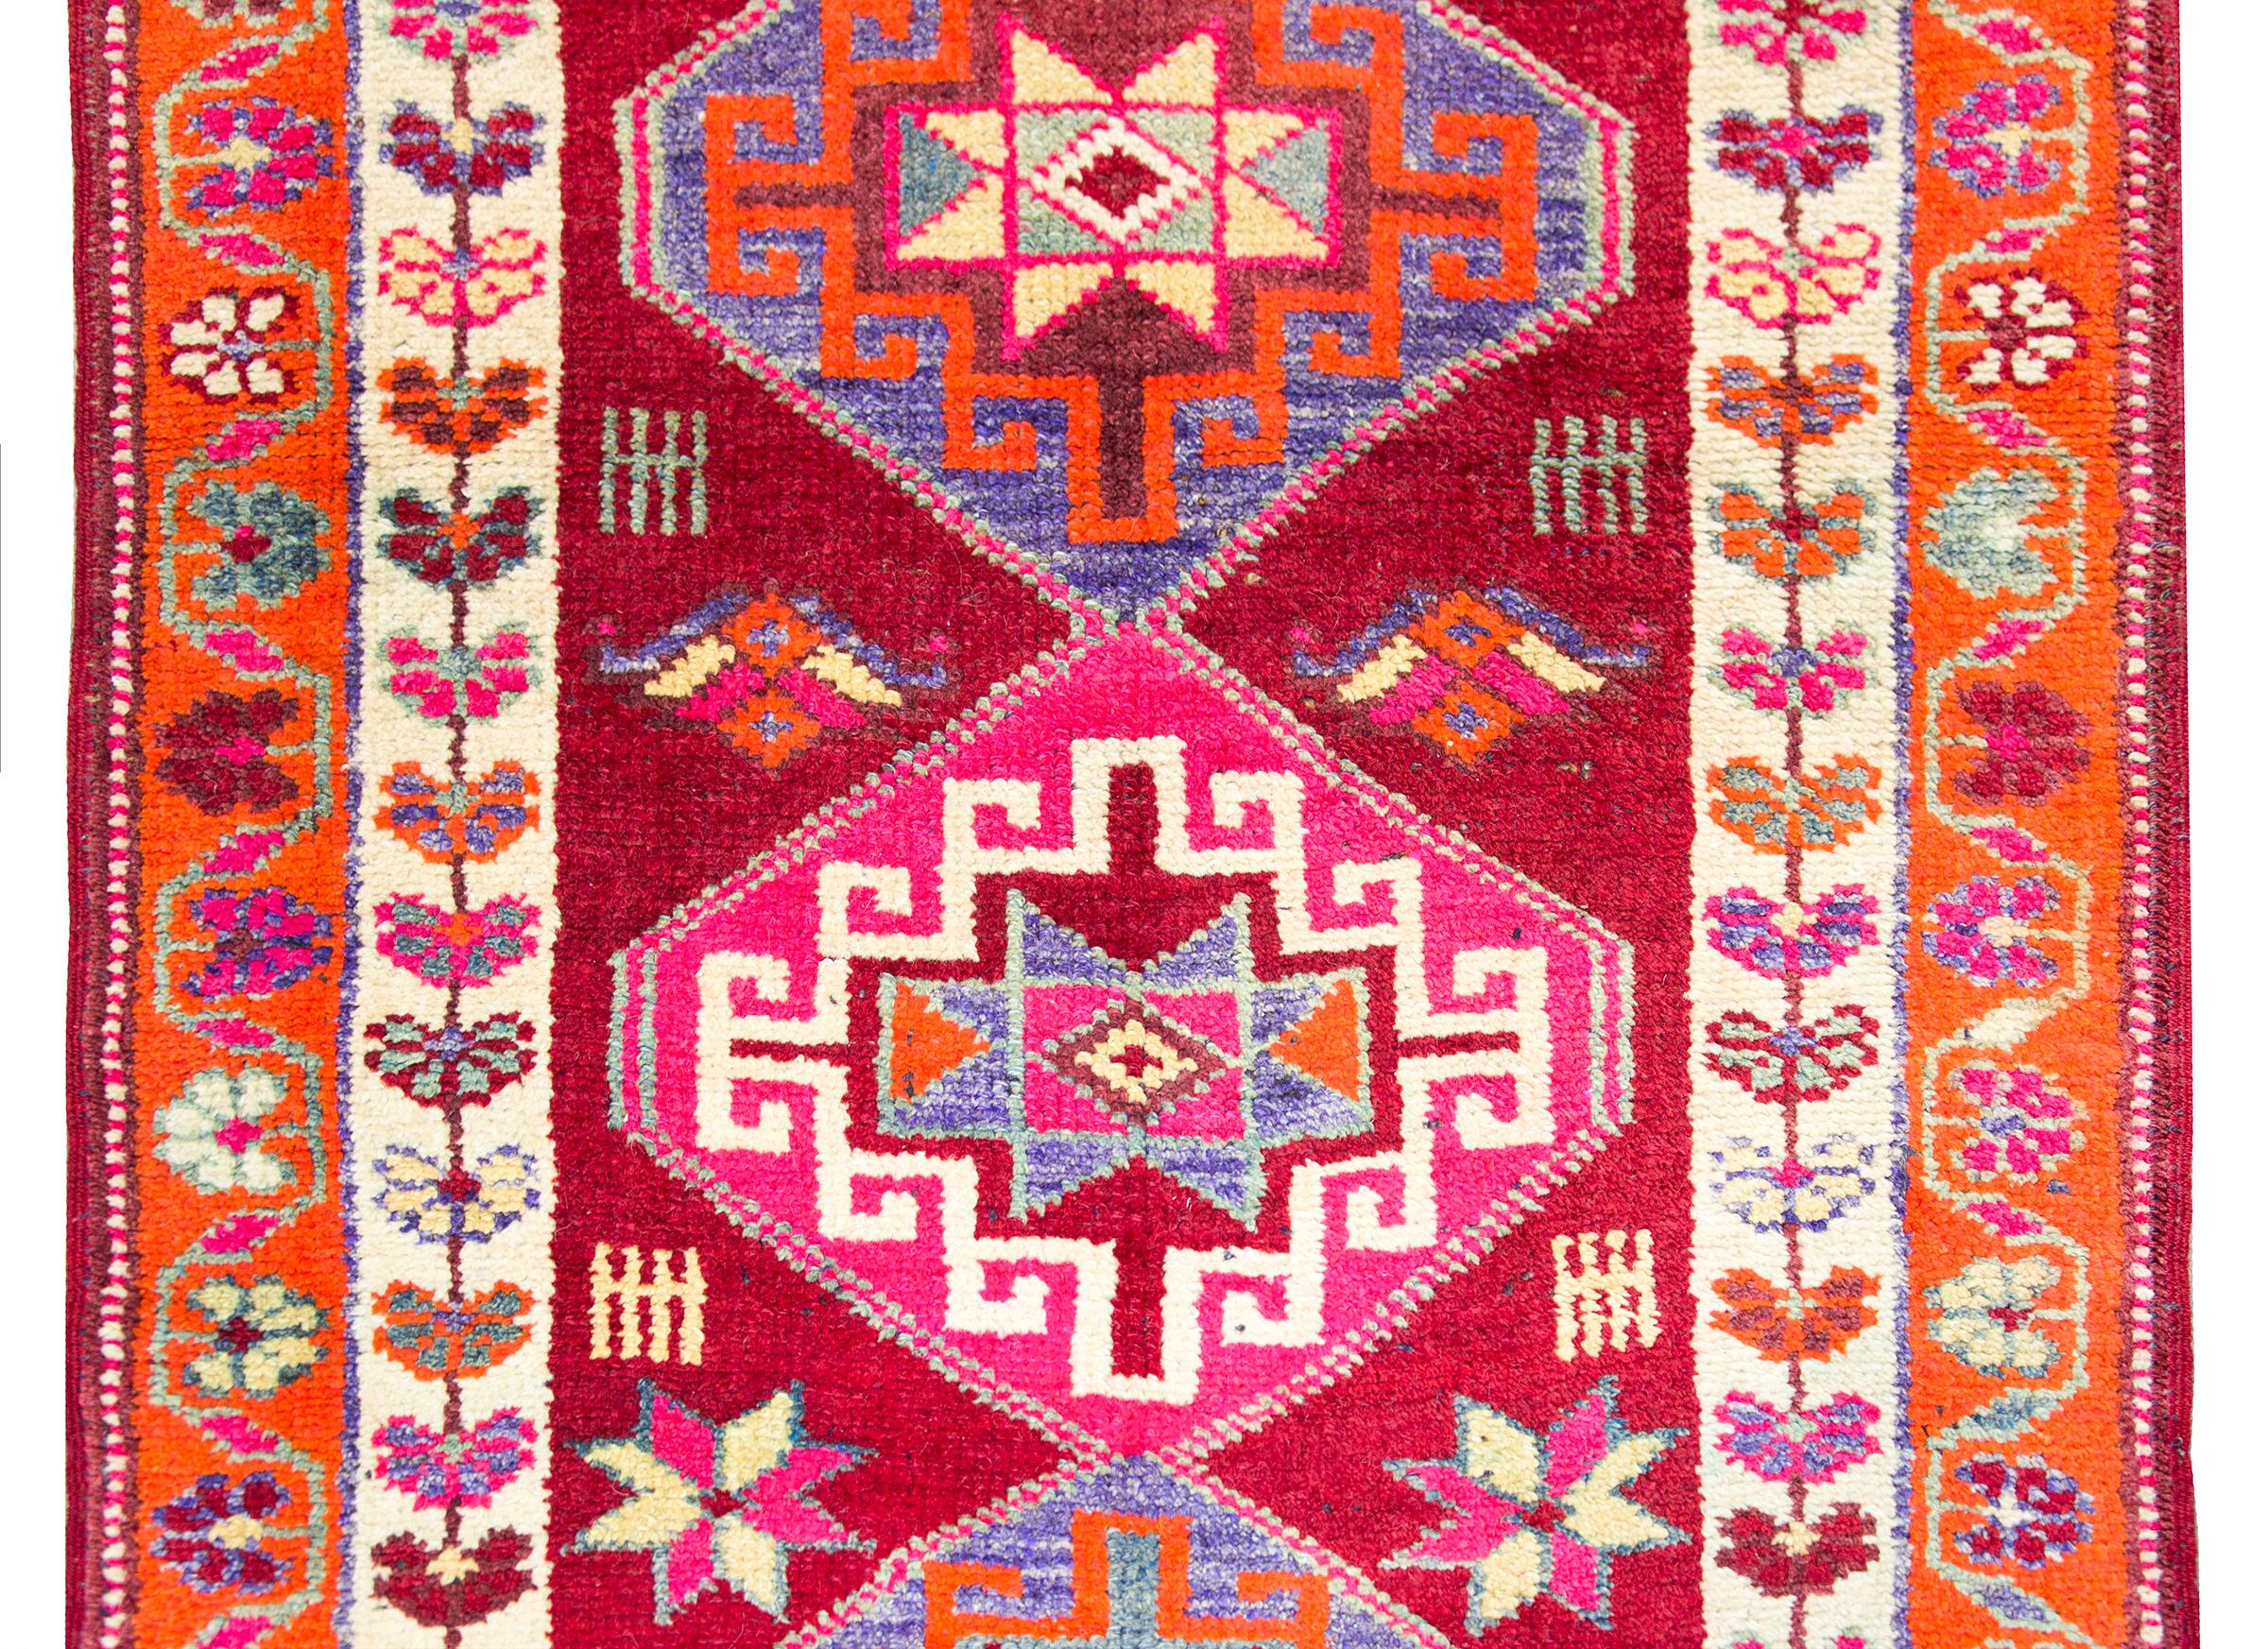 A stunning mid-20th century Turkish runner with multiple diamond medallions with geometric patterns woven in yellow, pink, orange, white, and indigo, and set against a dark red field with more stylized flowers, and surrounded by two floral patterned